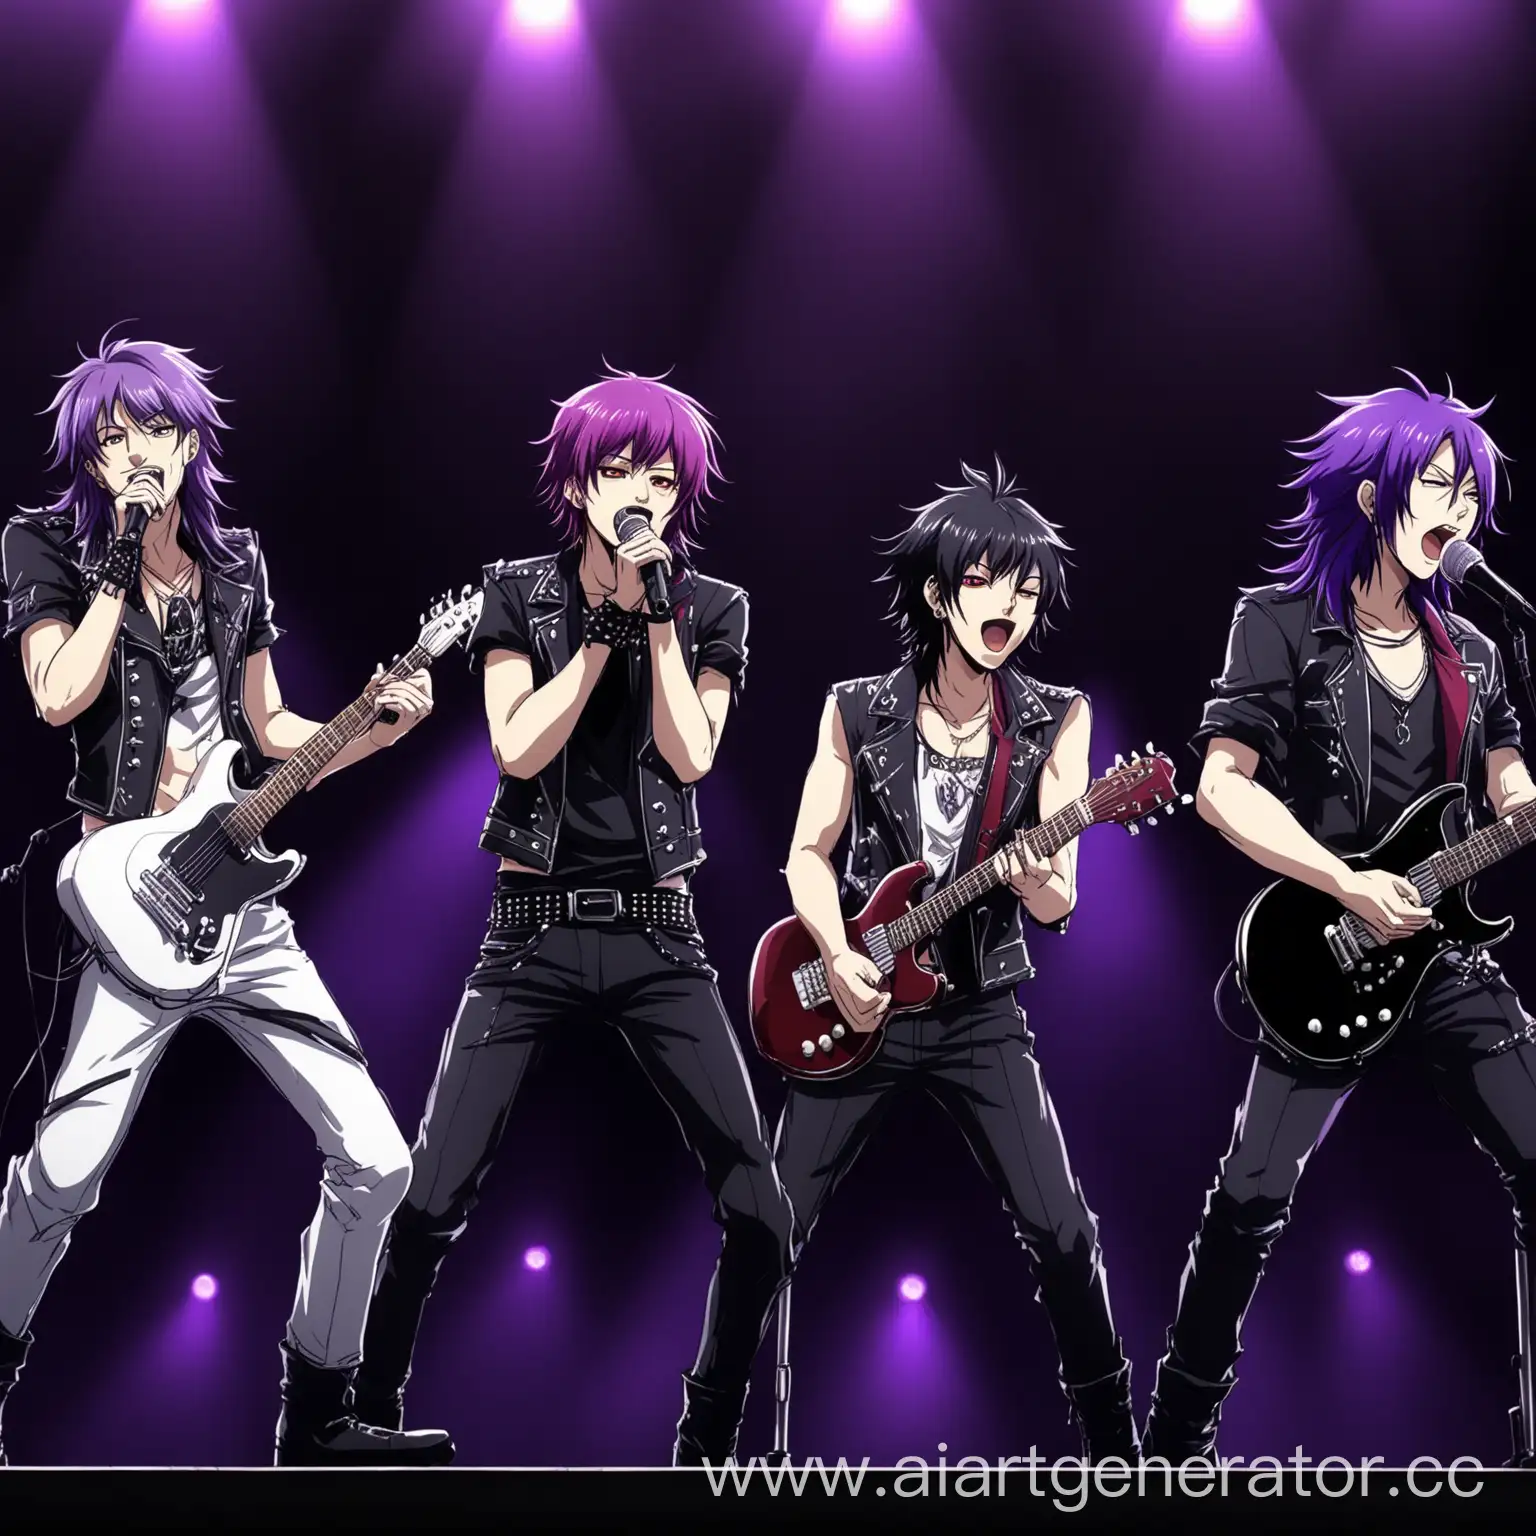 A musical group of anime-style rocker guys with black and purple hair who anneal and sing on stage.